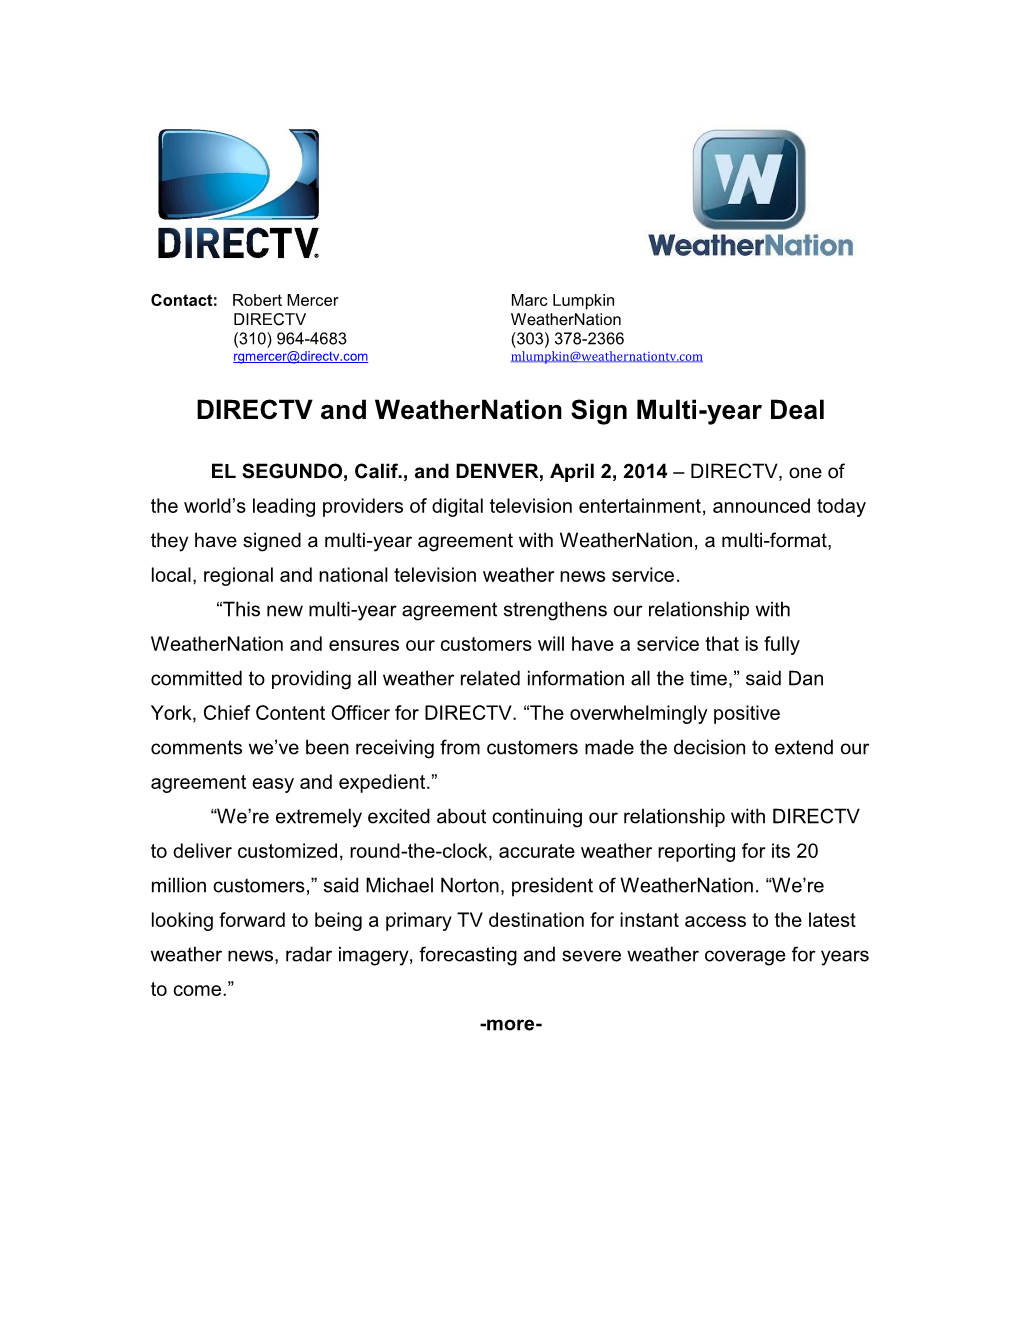 DIRECTV and Weathernation Sign Multi-Year Deal